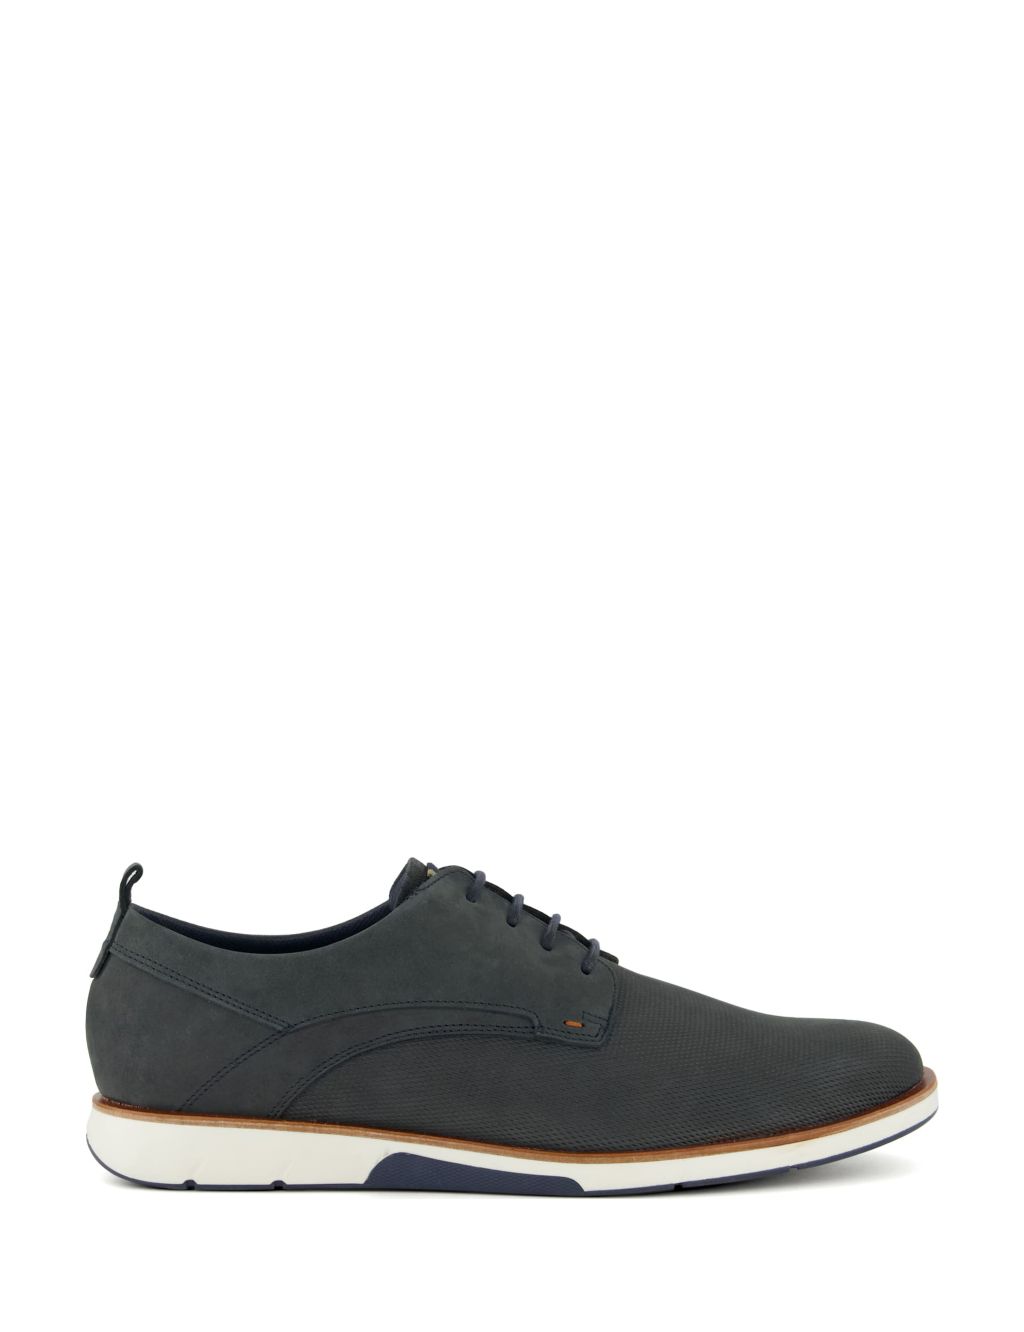 Leather Derby Shoes image 1